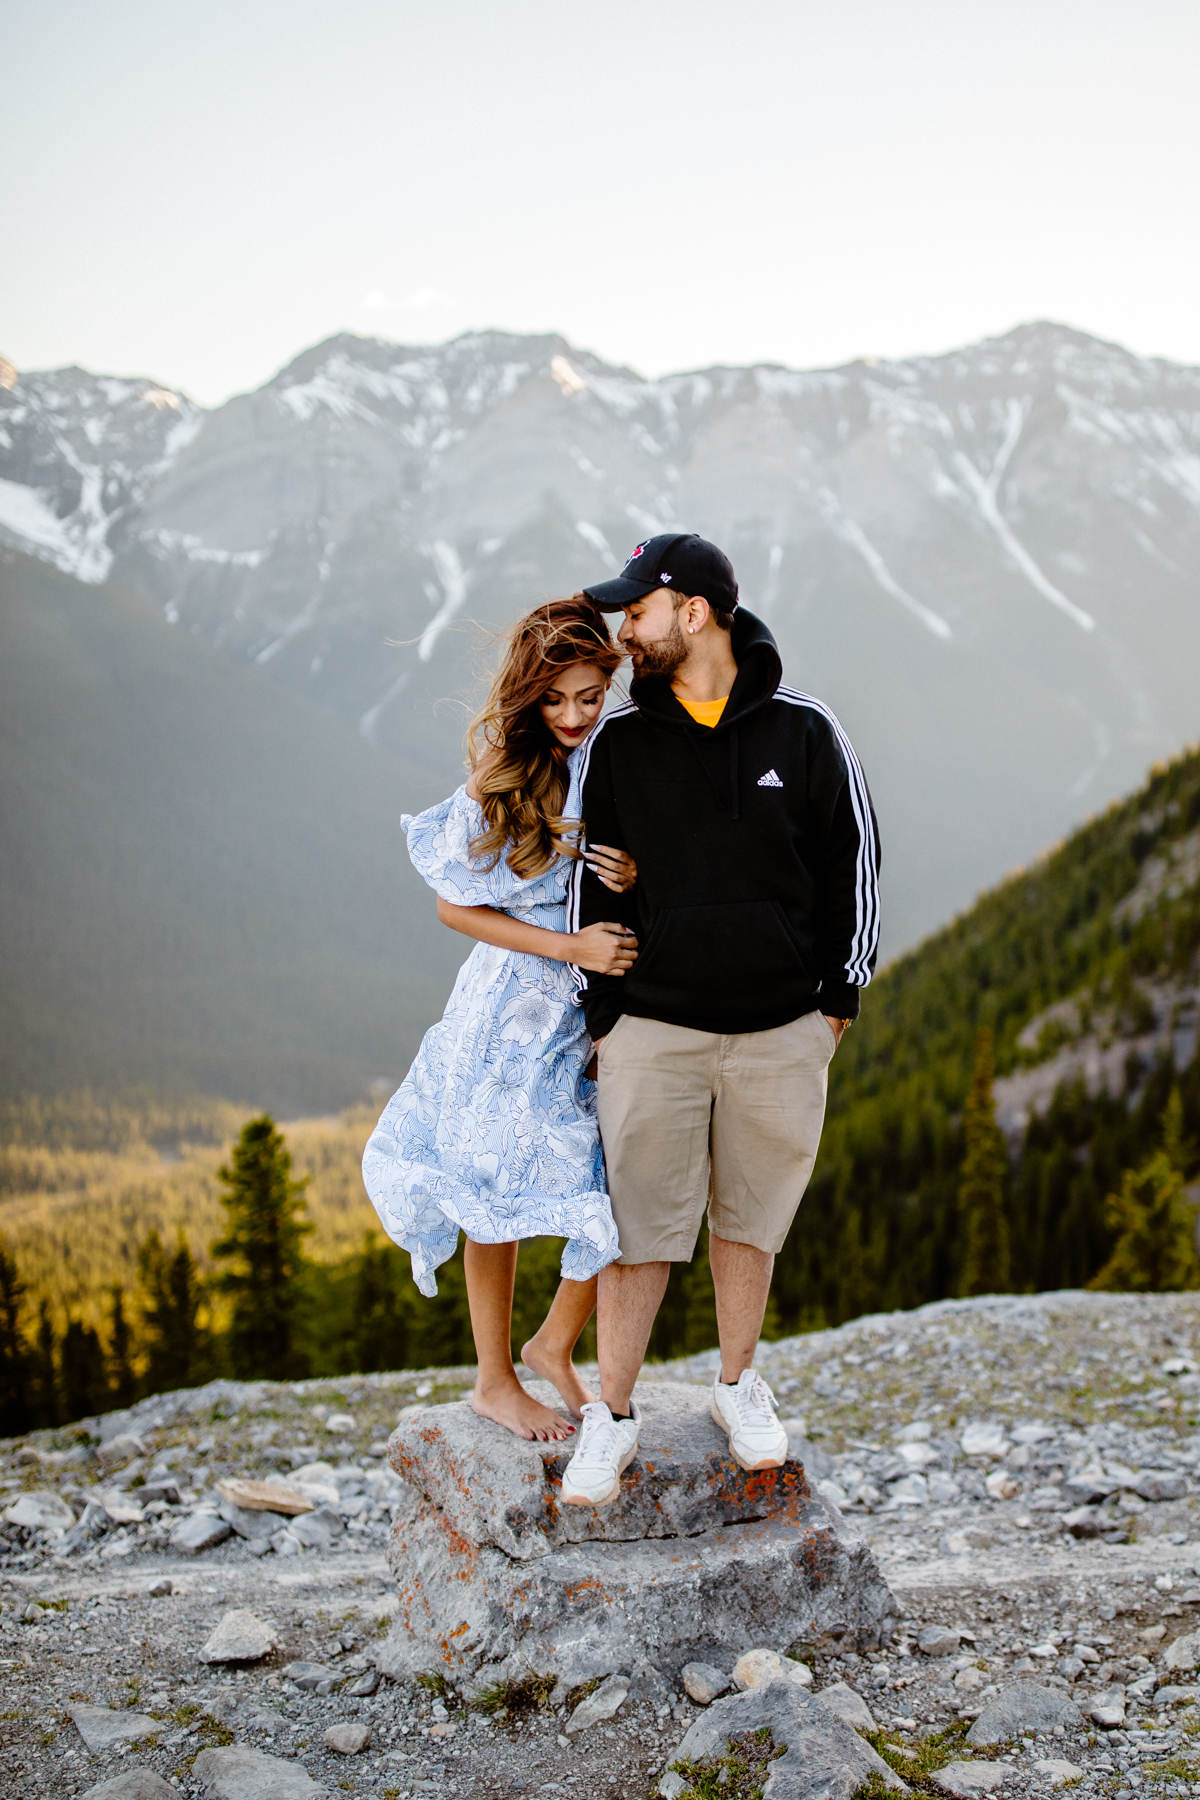 Surprise Proposal Photographers in Banff - Photo 6